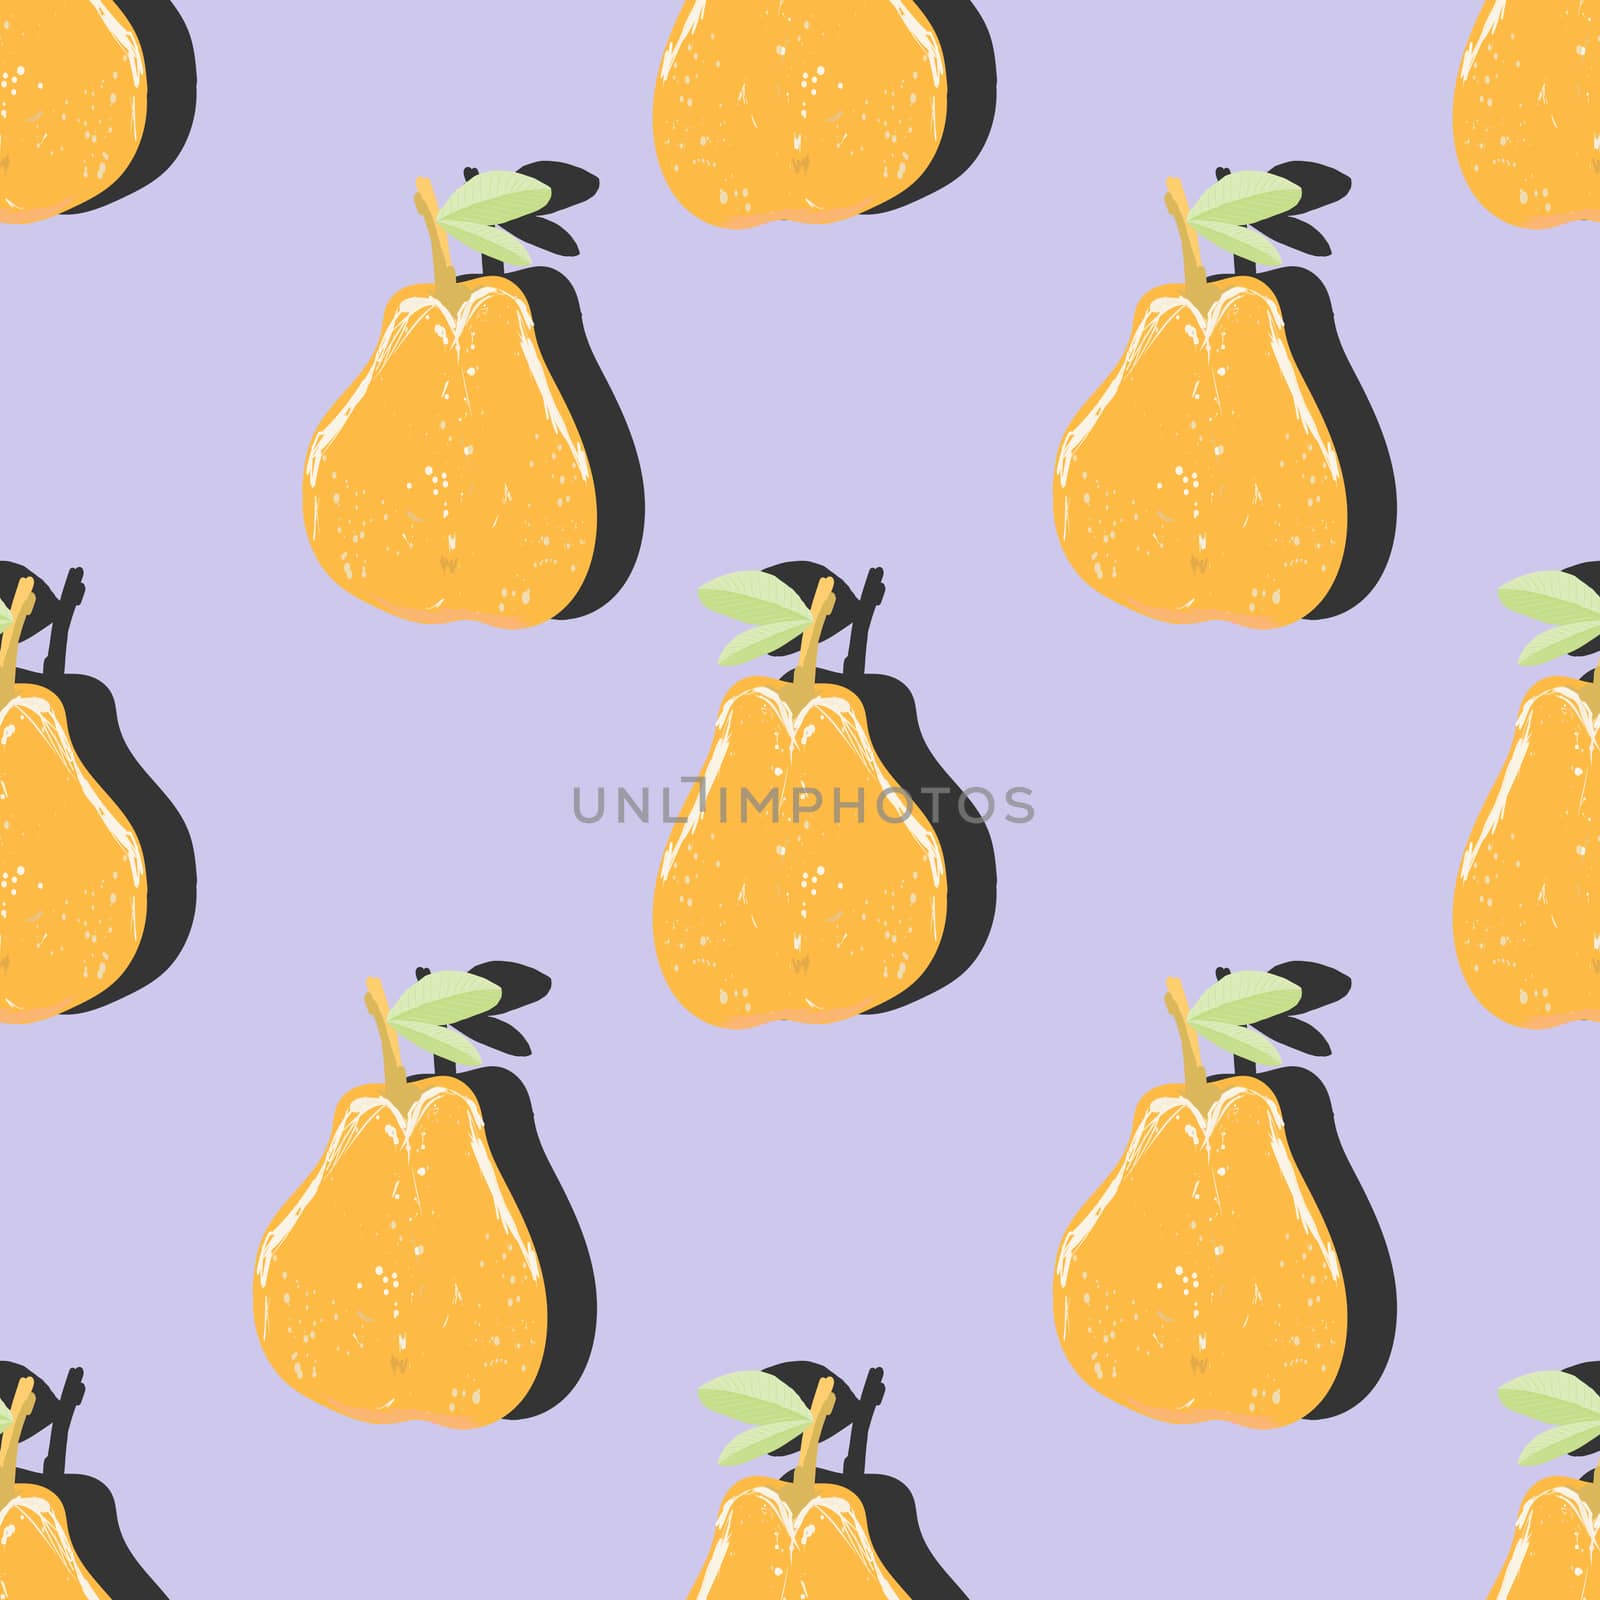 Orange pear top view pop art with shadow seamless pattern on purple background. Summer fruit endless design for wallpapers, fabrics, textiles, packaging.